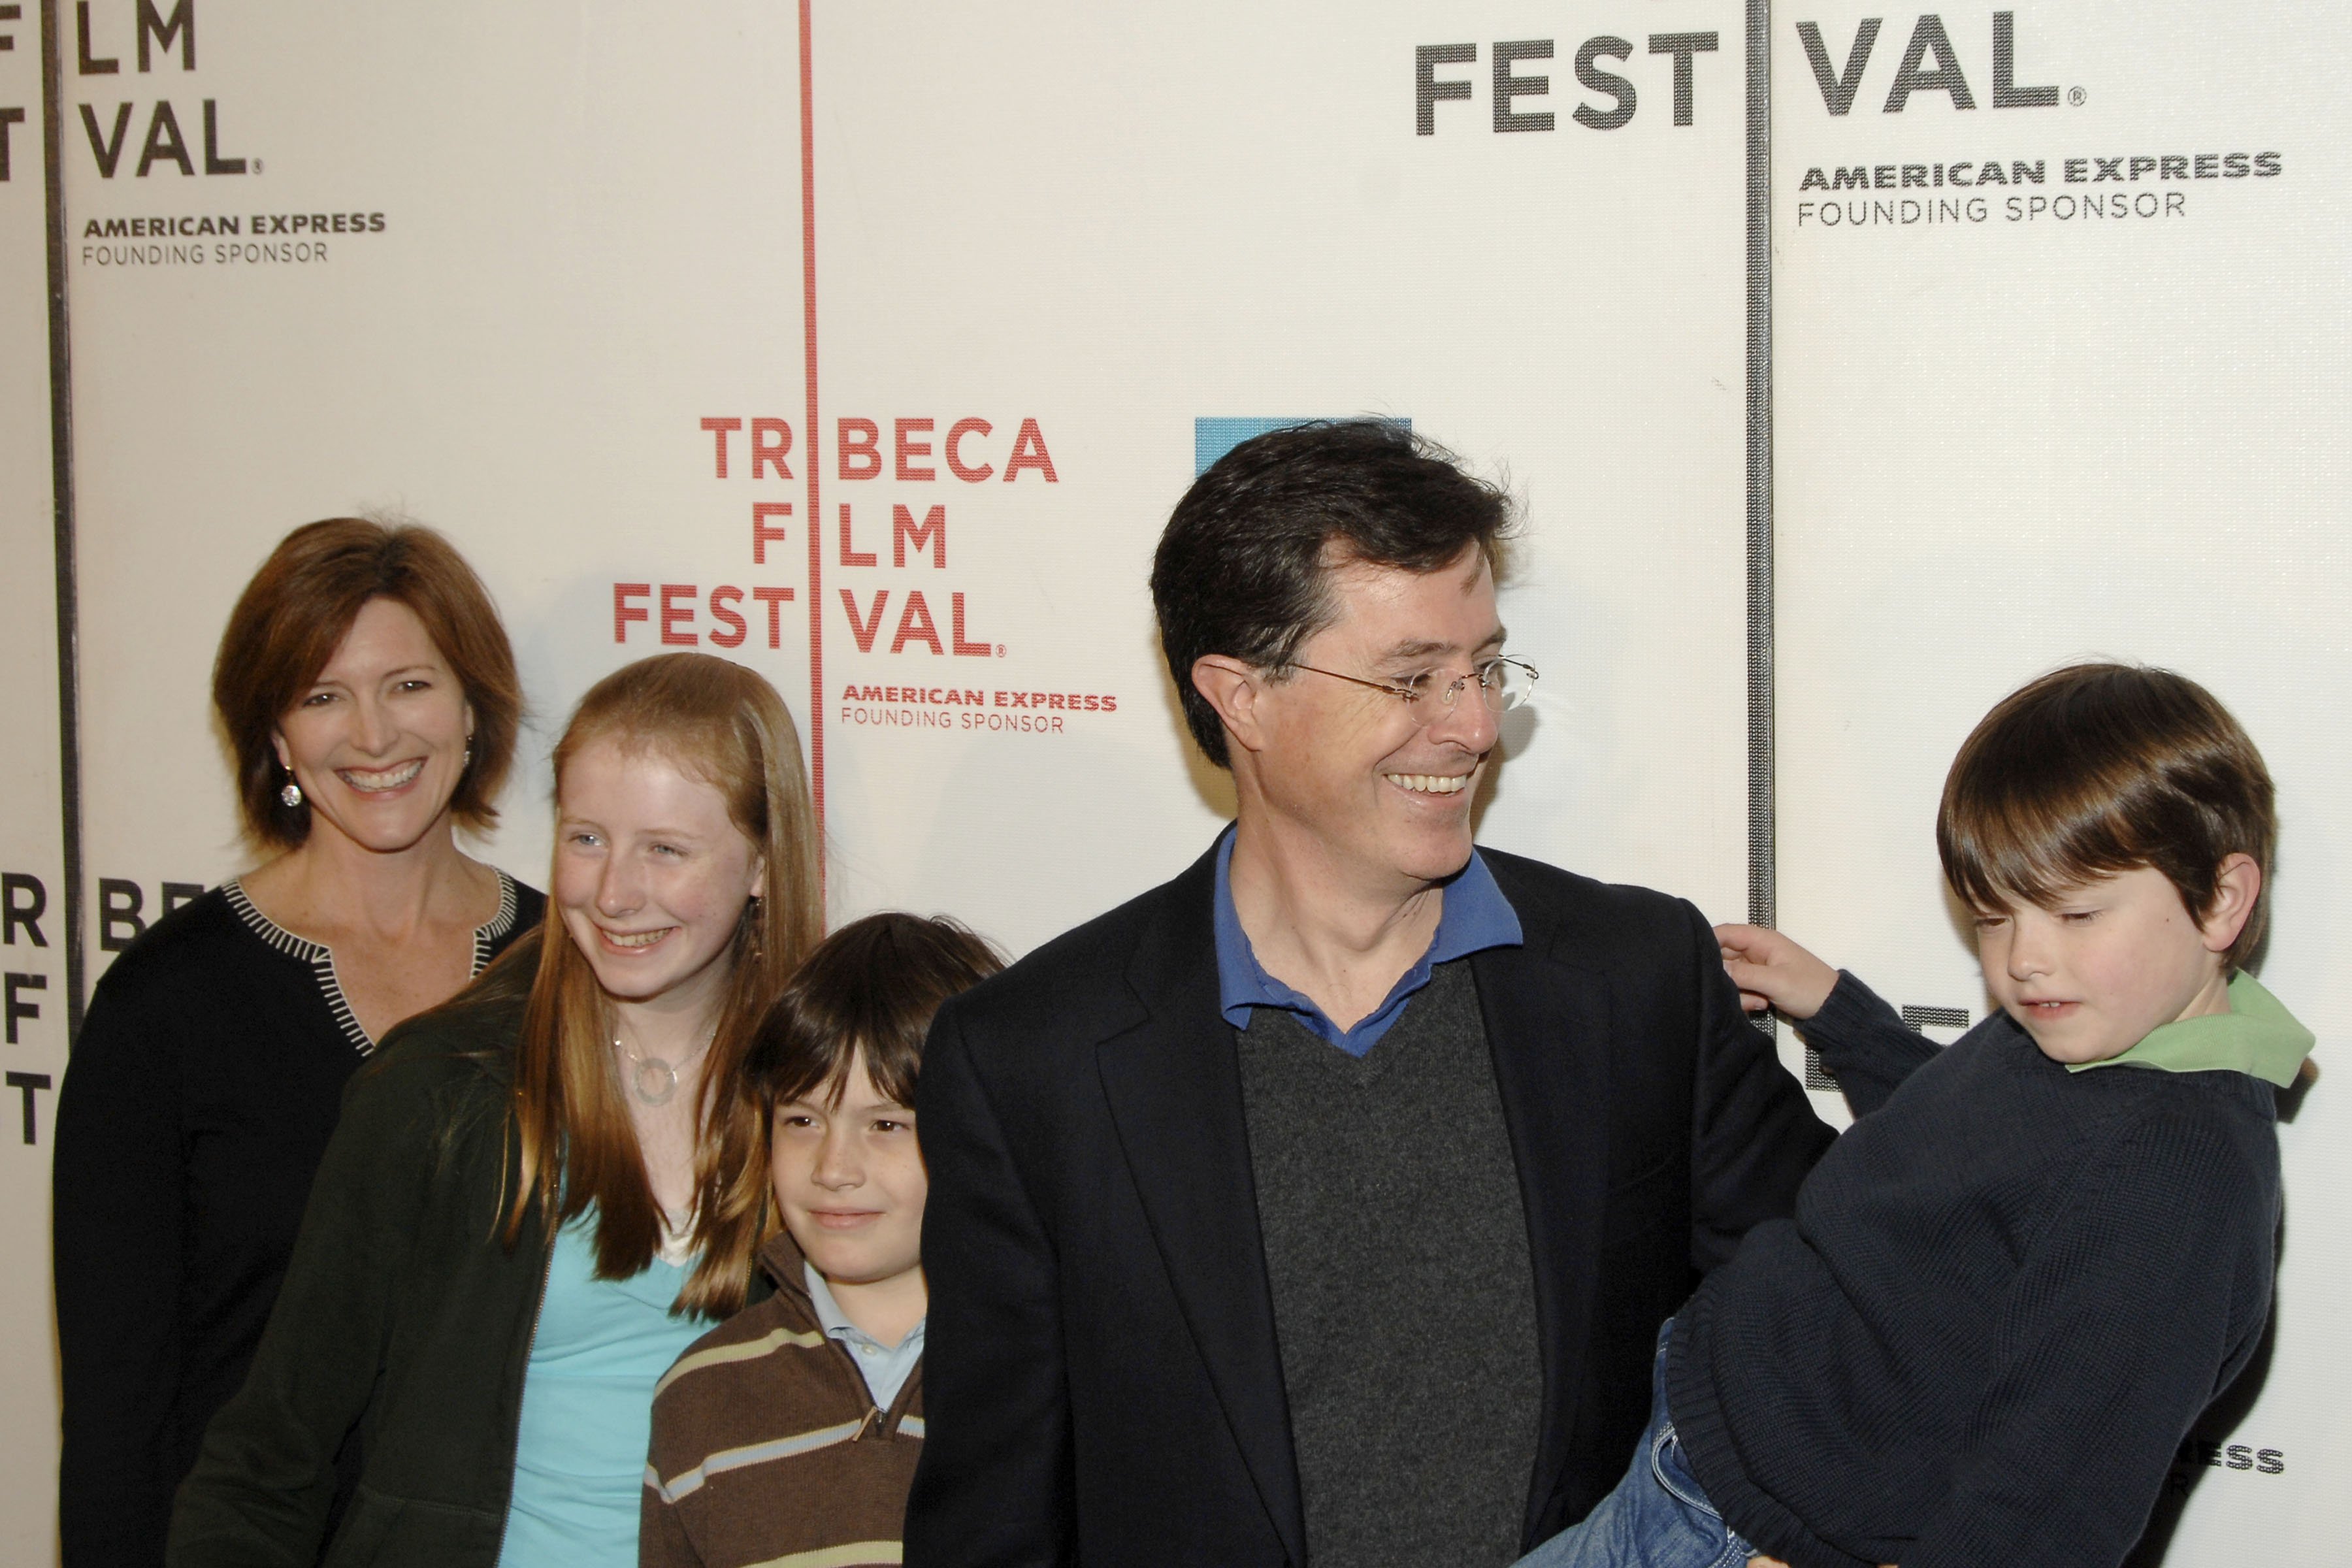 Evelyn McGee-Colbert, Madeline Colbert, Peter Colbert, Stephen Colbert, and John Colbert at the Tribeca Film Festival screening of "Speed Racer" on May 3, 2008 | Source: Getty Images